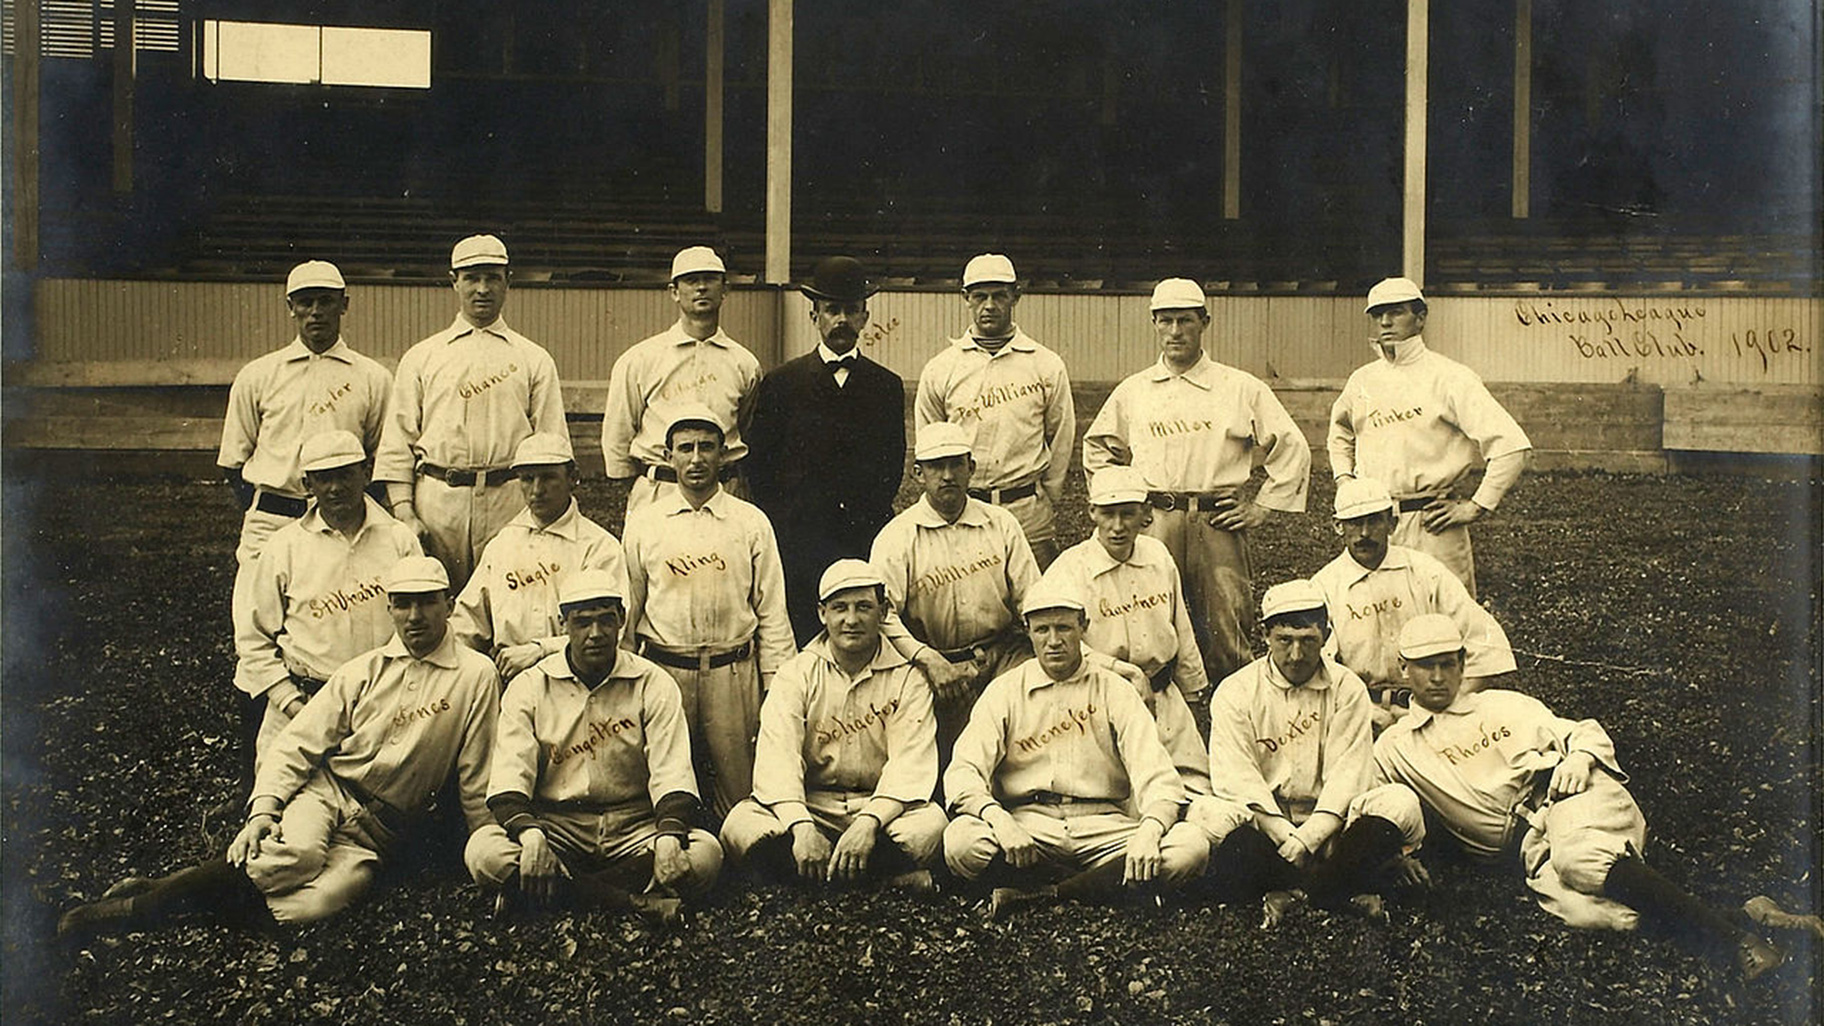 When Chicago Ruled Baseball: The Cubs-White Sox World Series of 1906